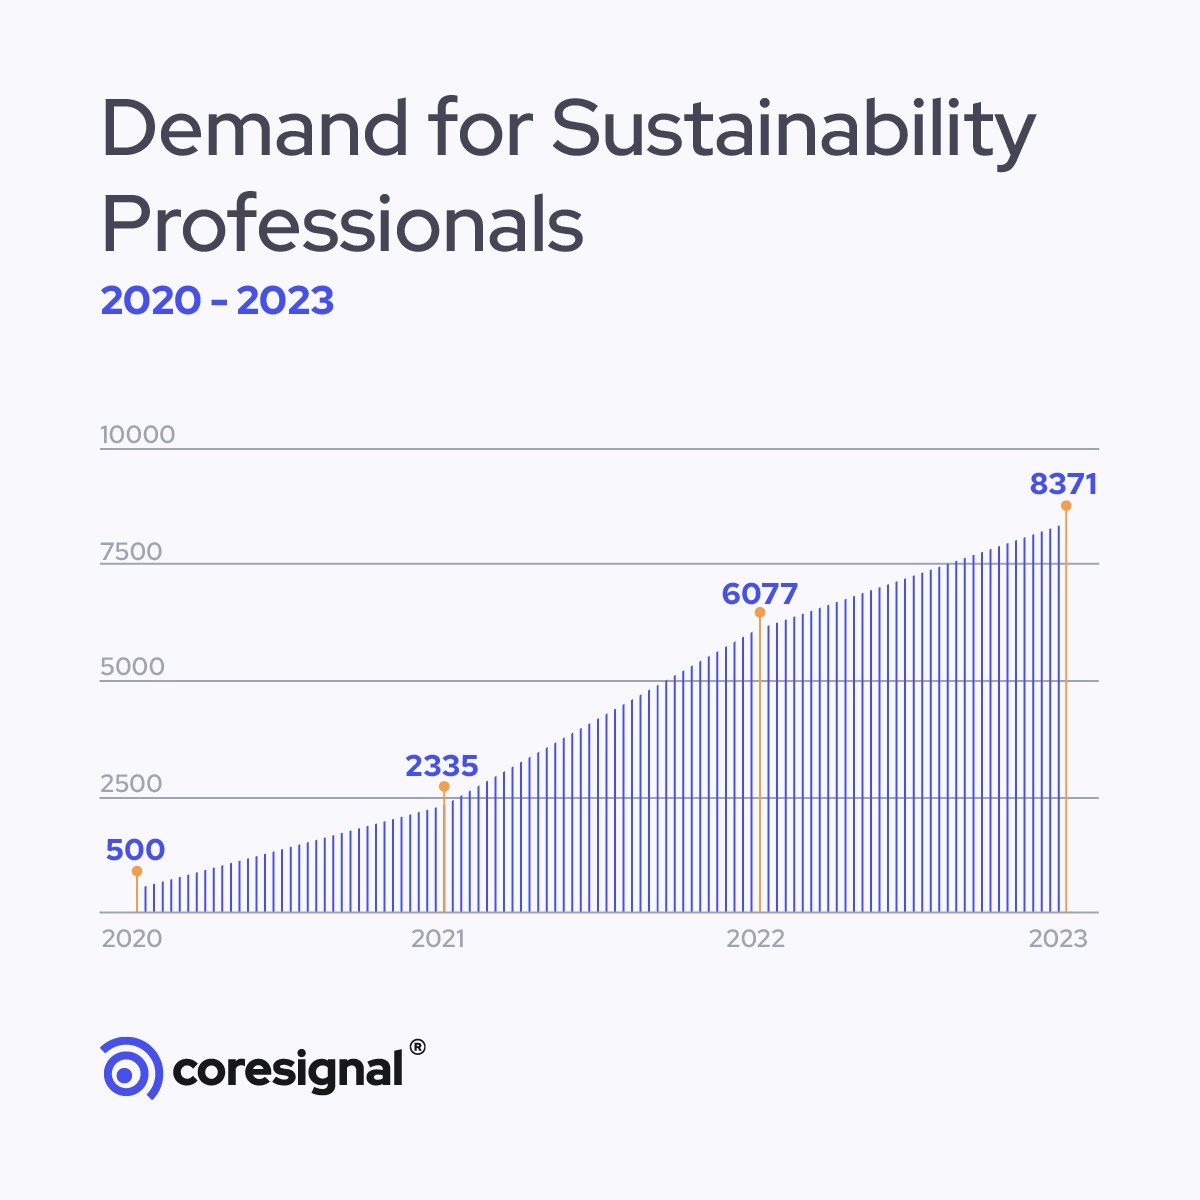 Growing demand for sustainability professionals 2020-2023